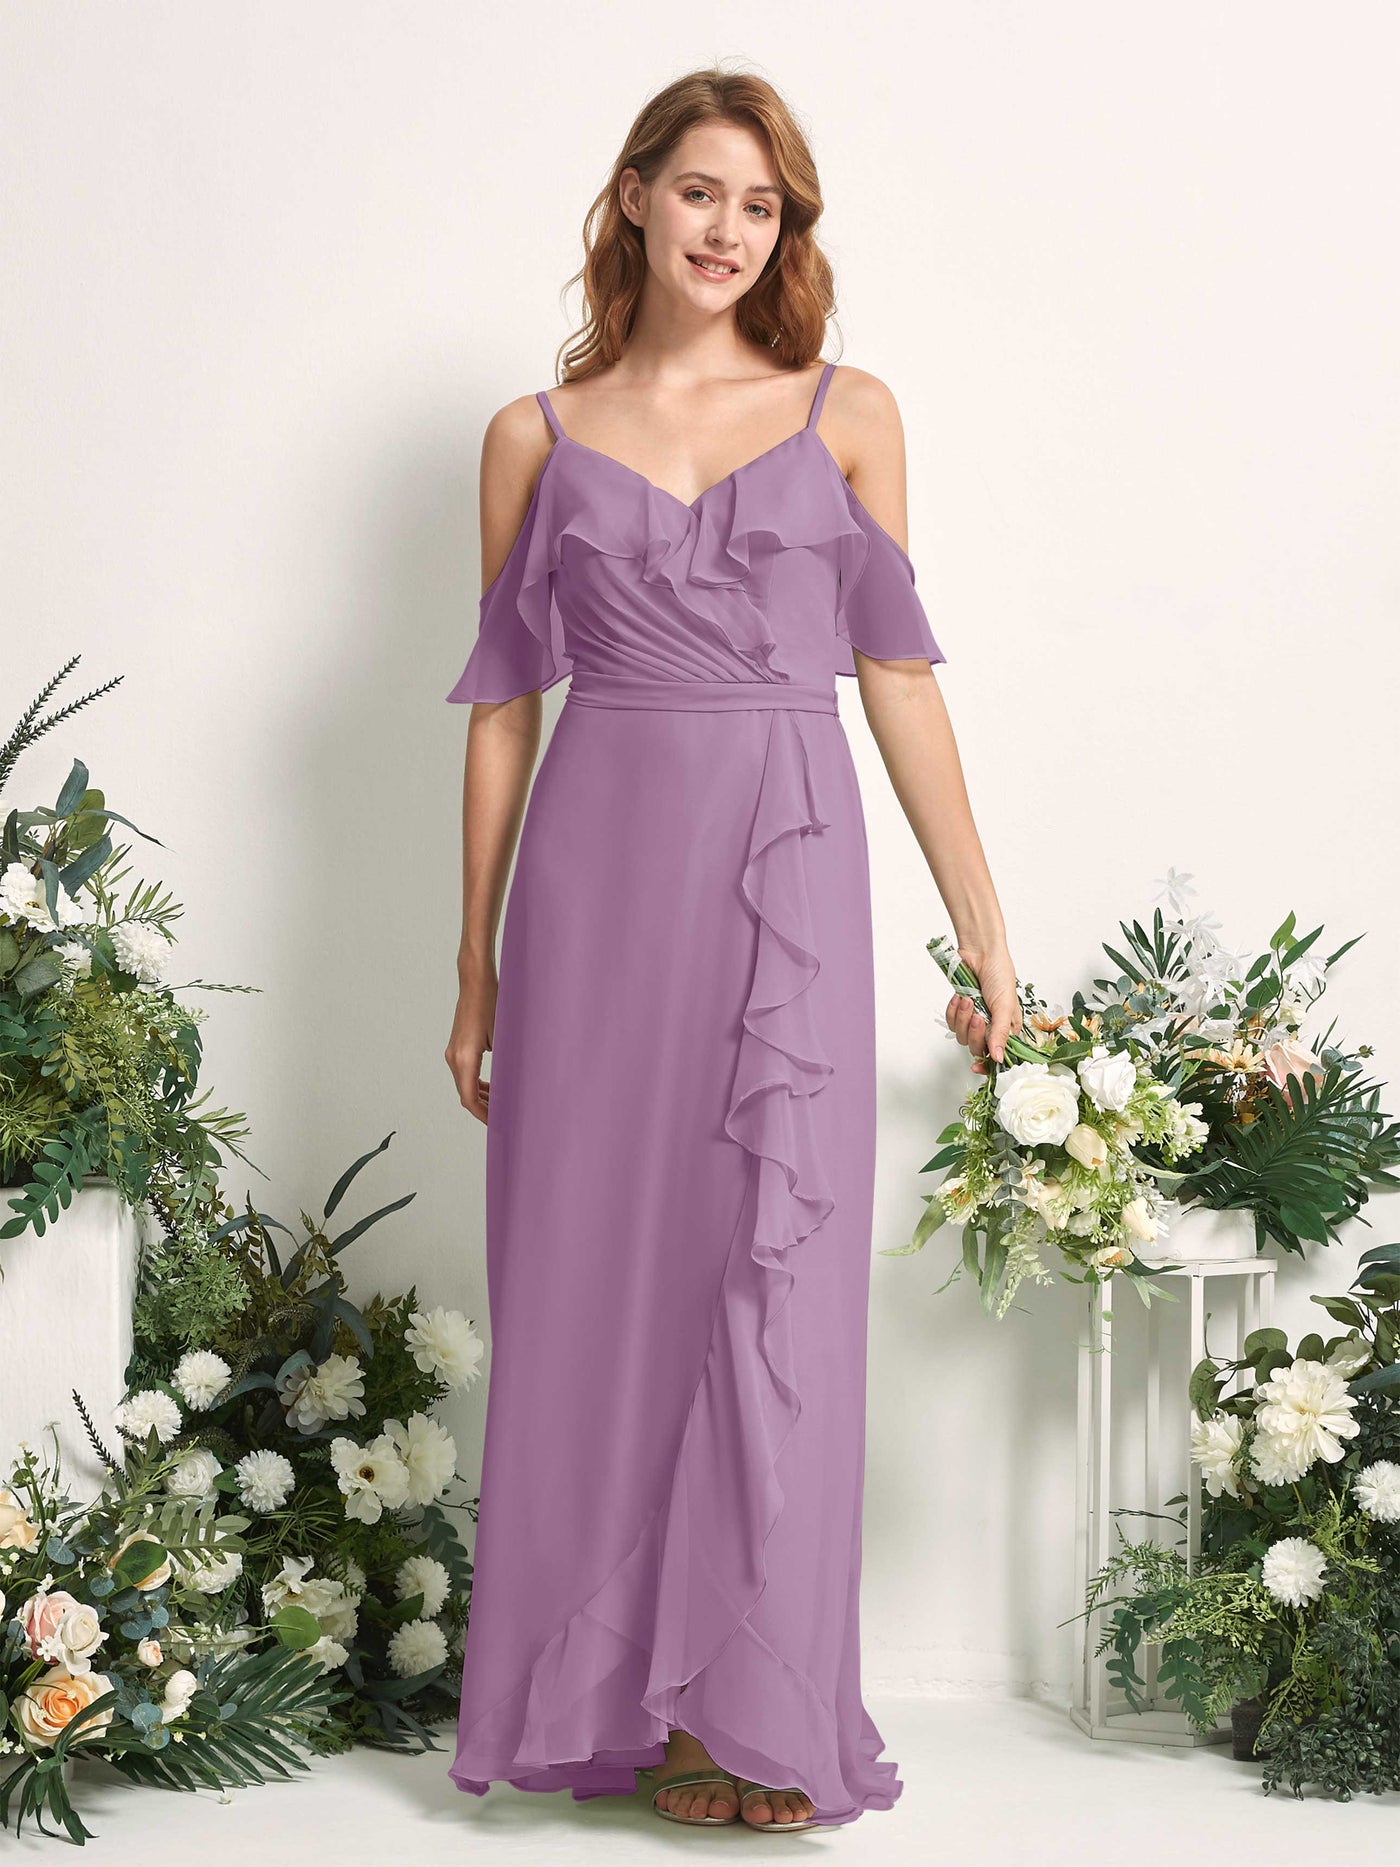 Bridesmaid Dress A-line Chiffon Spaghetti-straps Full Length Sleeveless Wedding Party Dress - Orchid Mist (81227421)#color_orchid-mist